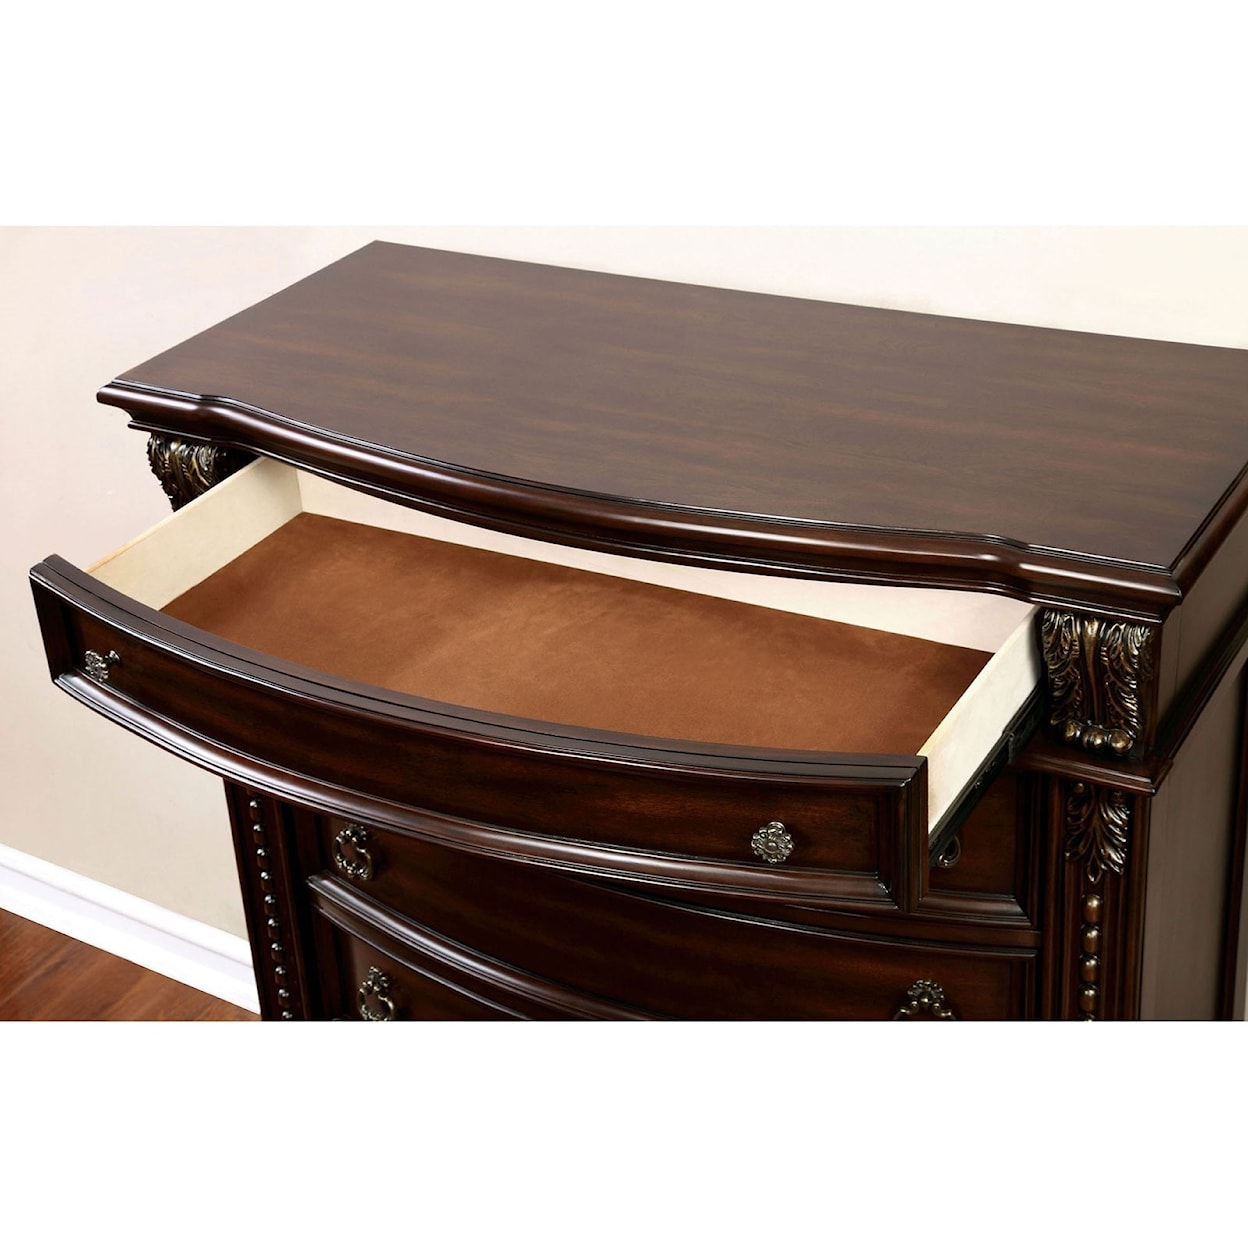 Furniture of America Fromberg Chest